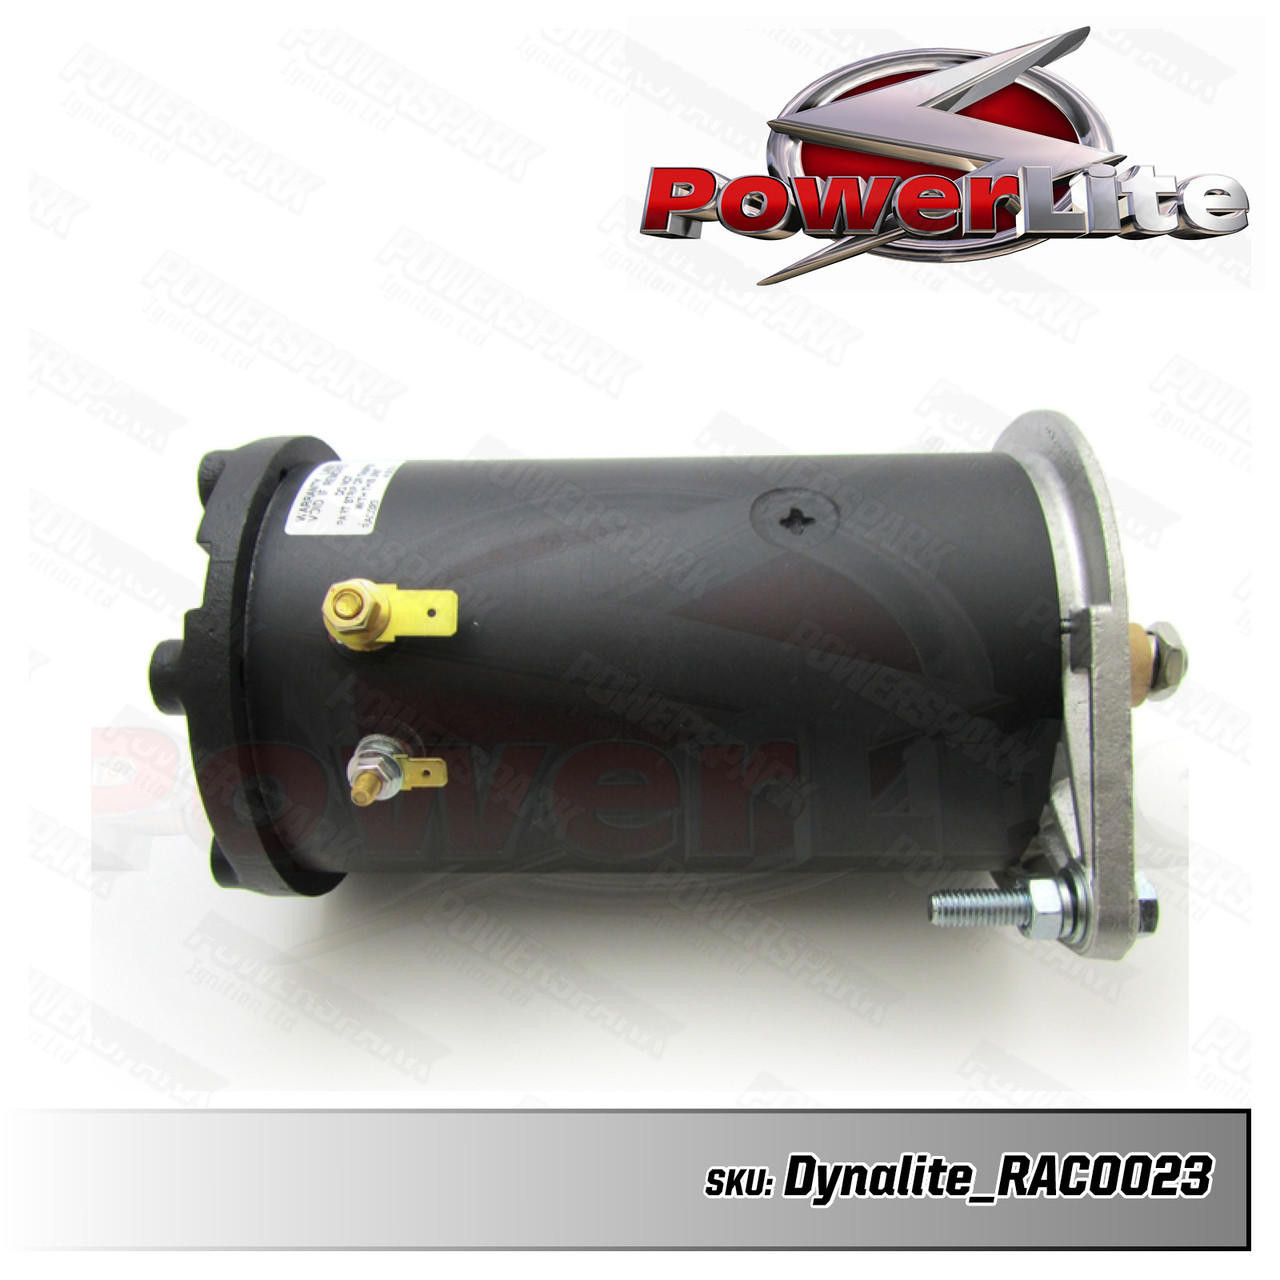  Dynalite Dynamo to Alternator Conversion replaces Lucas C42 Dynamo - Neg Earth with Power Steering